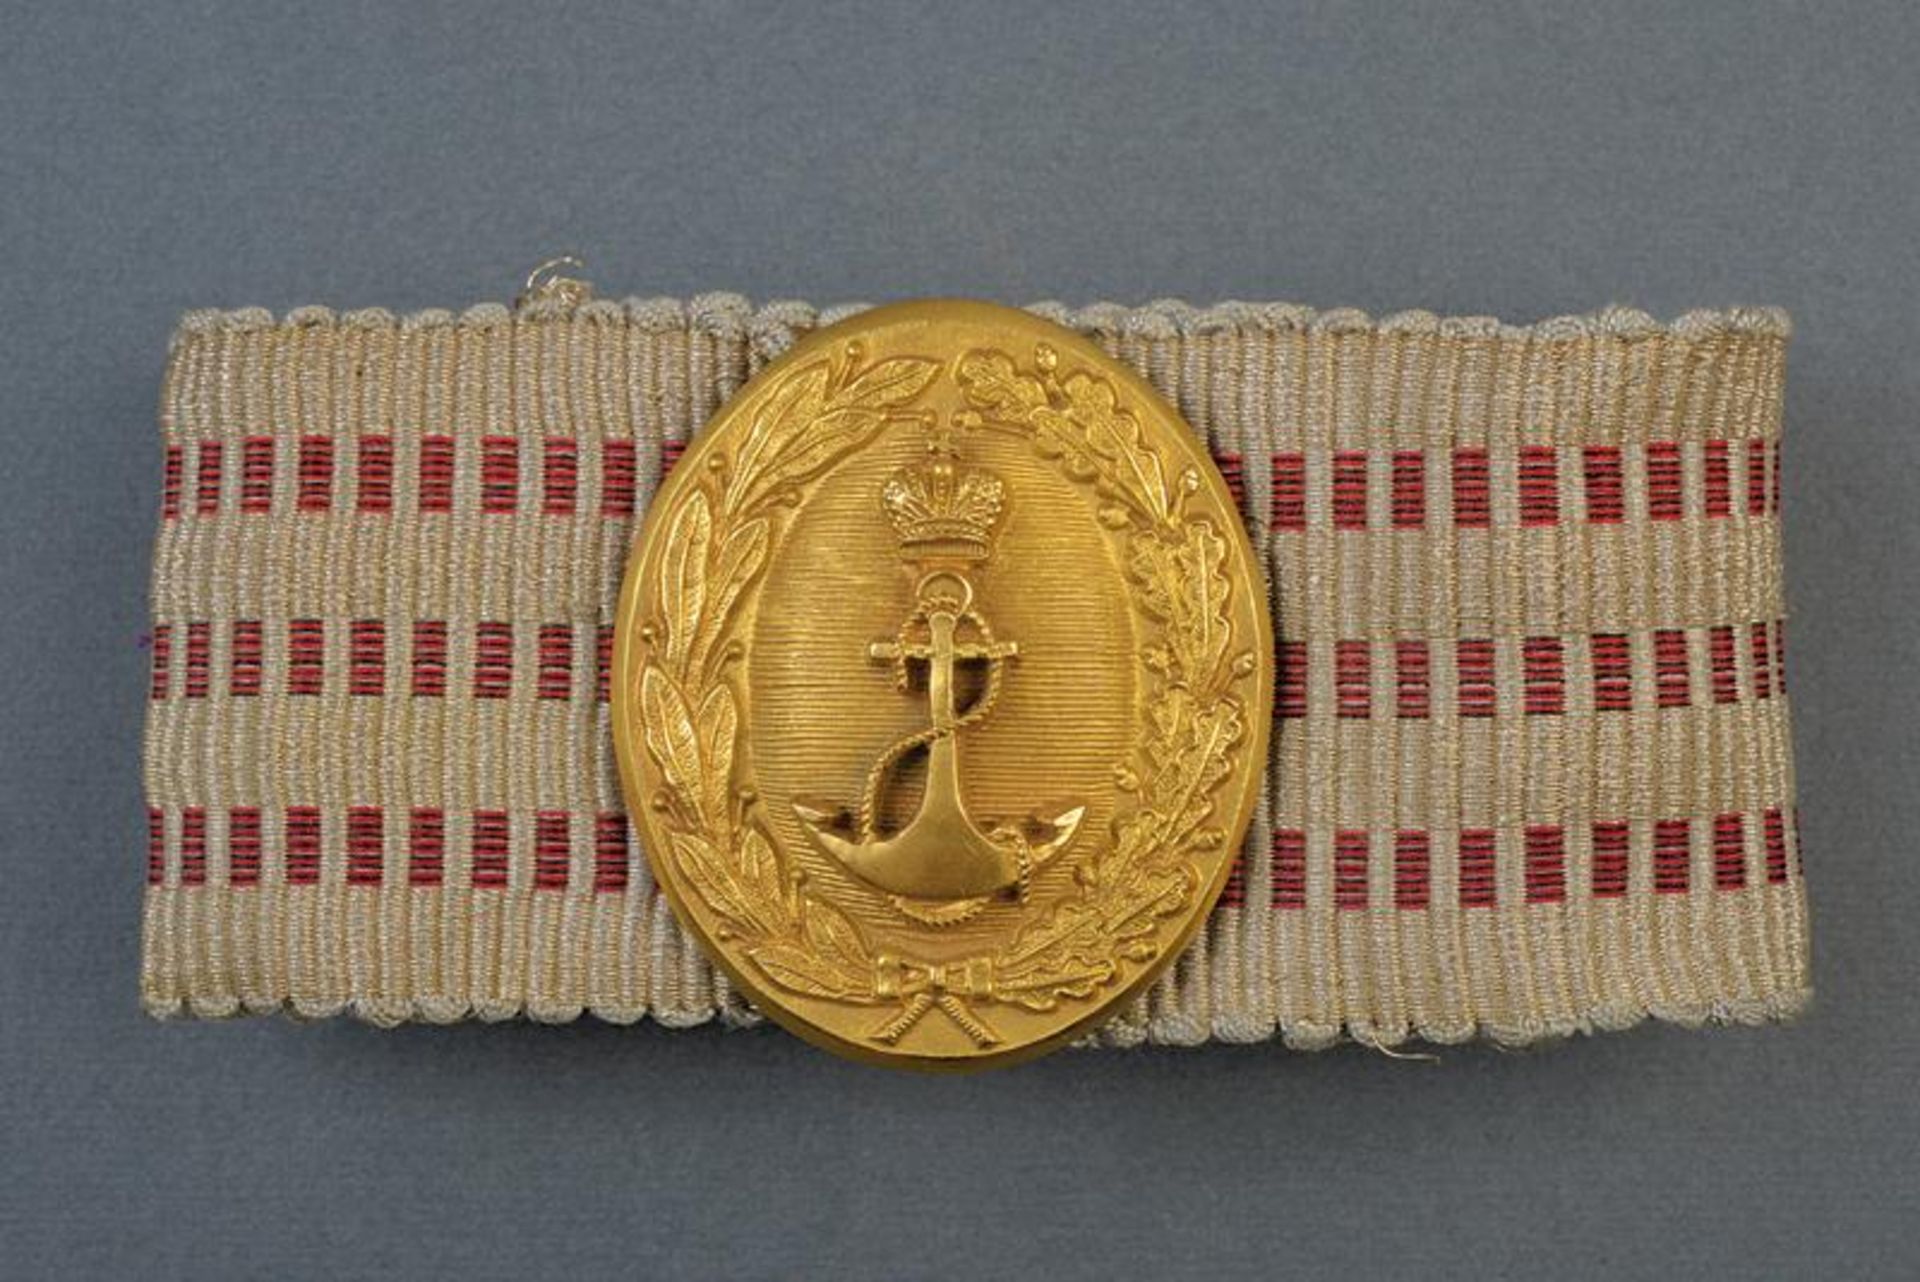 An imperial navy officer's belt buckle